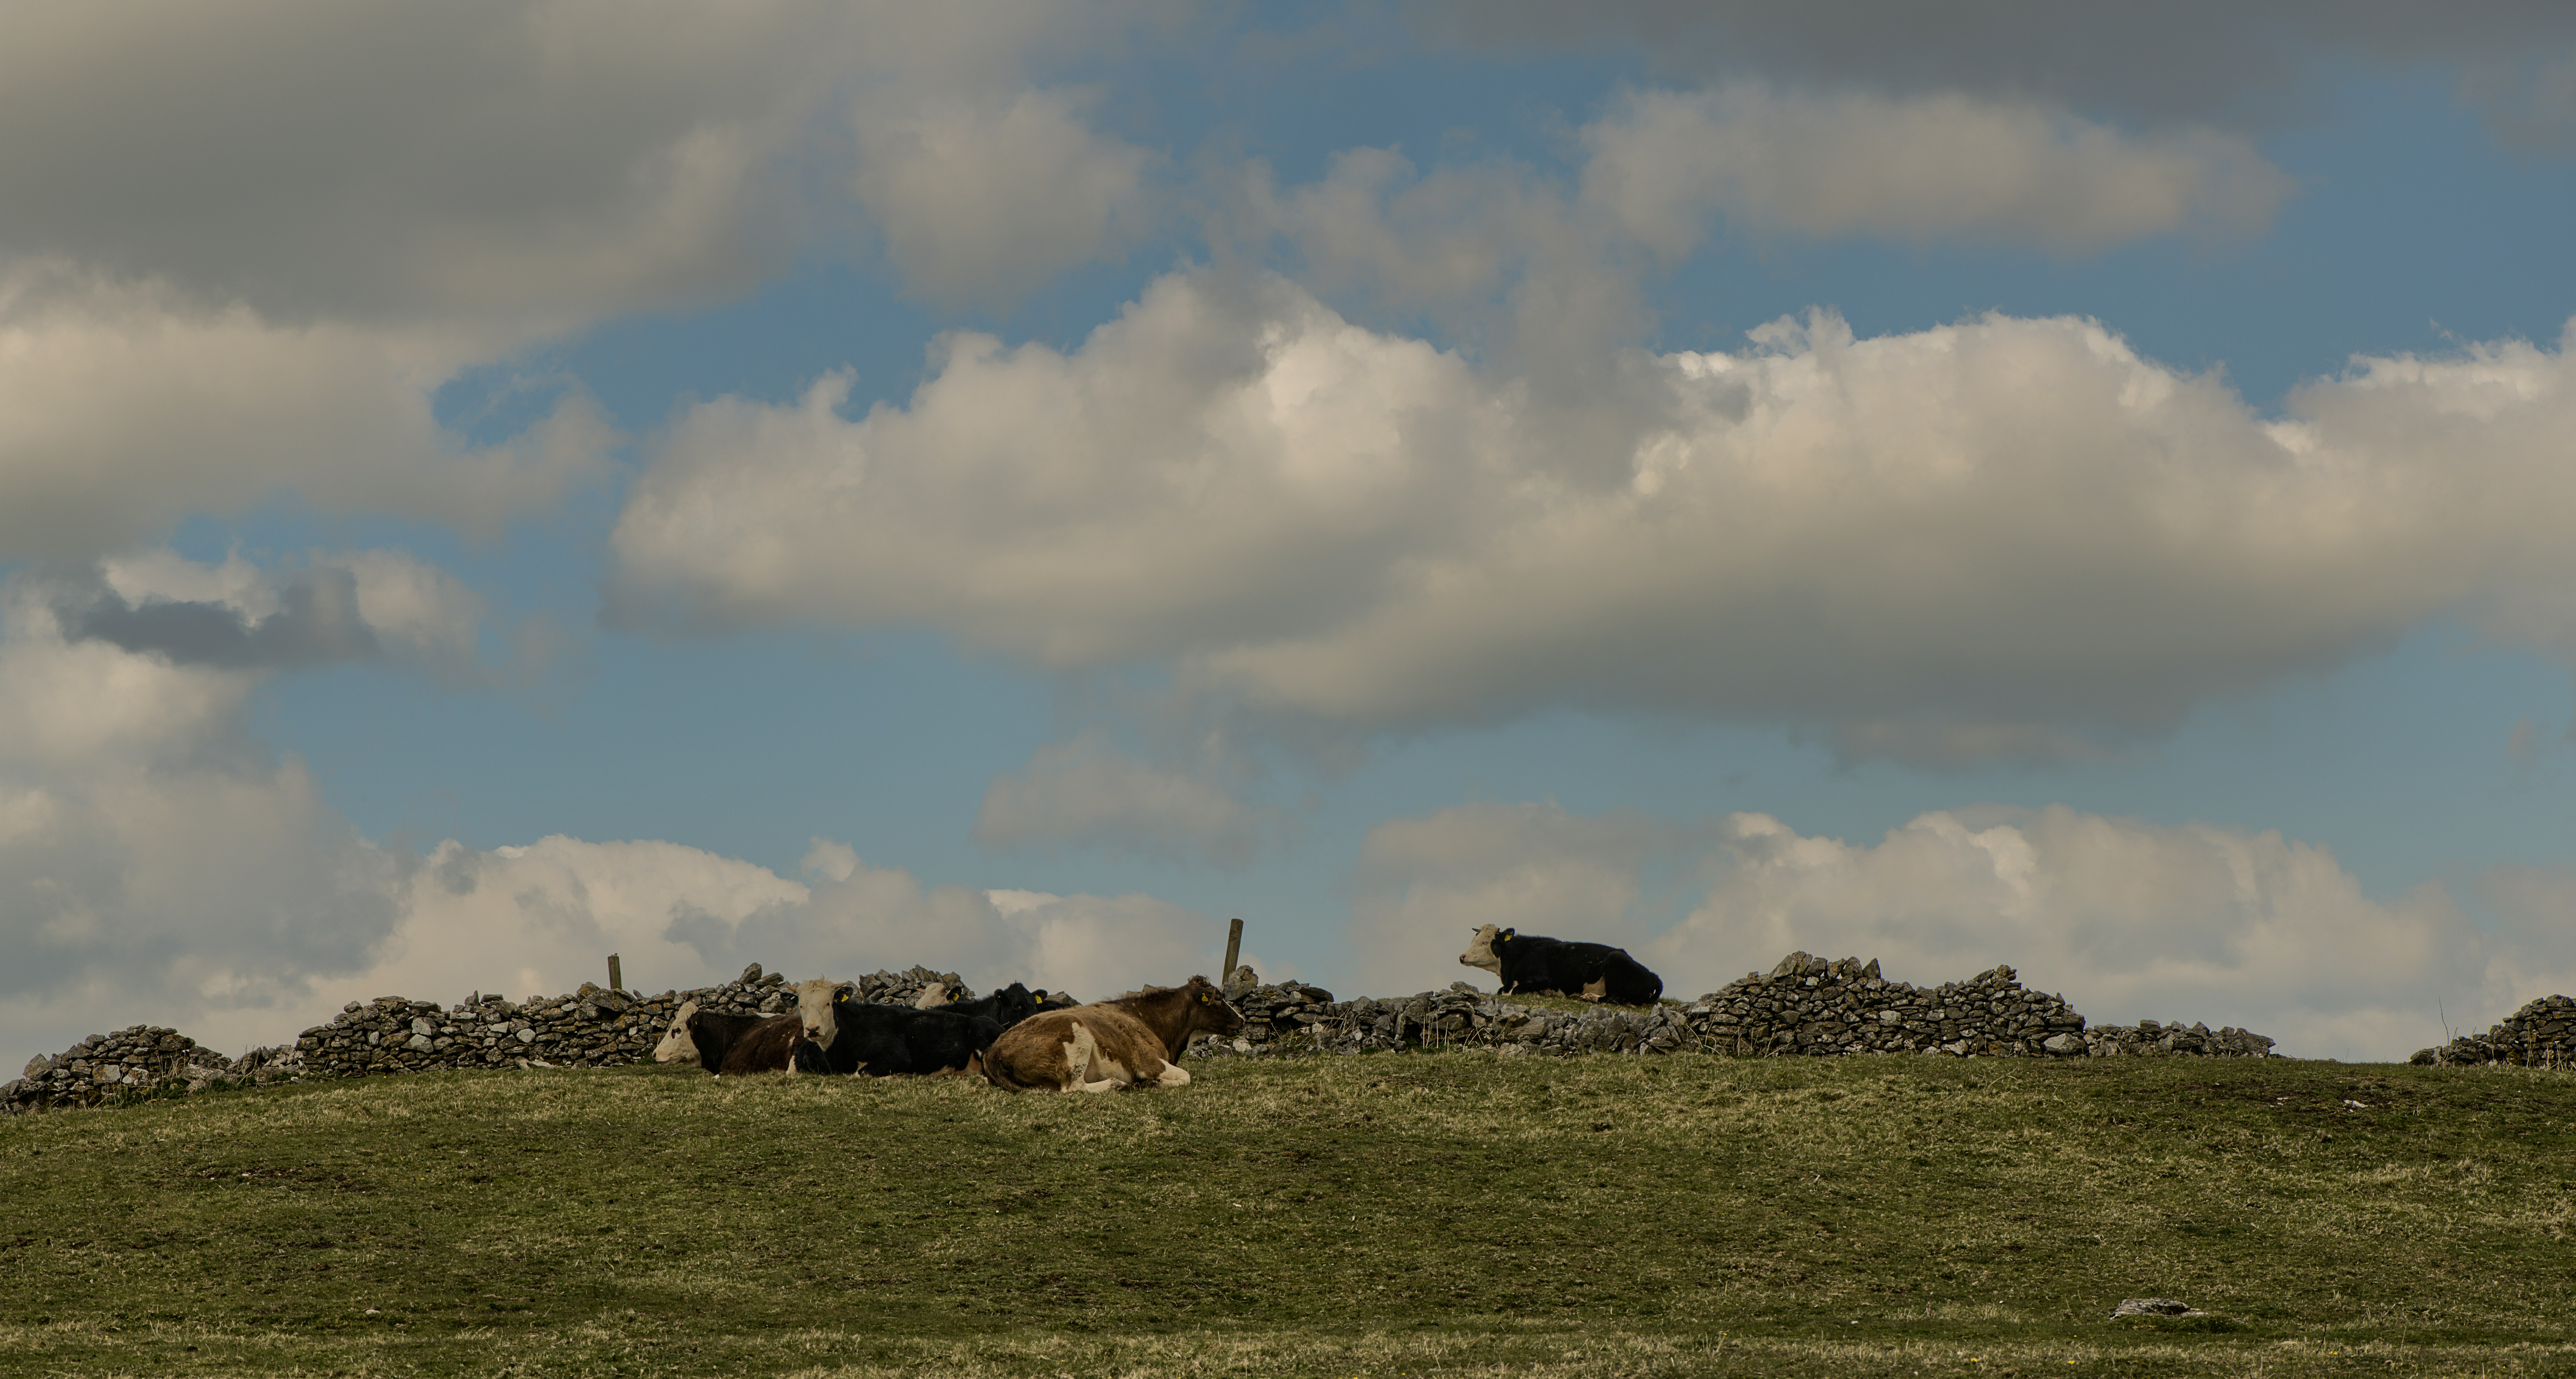 herd of sheep on green grass field under cloudy sky during daytime